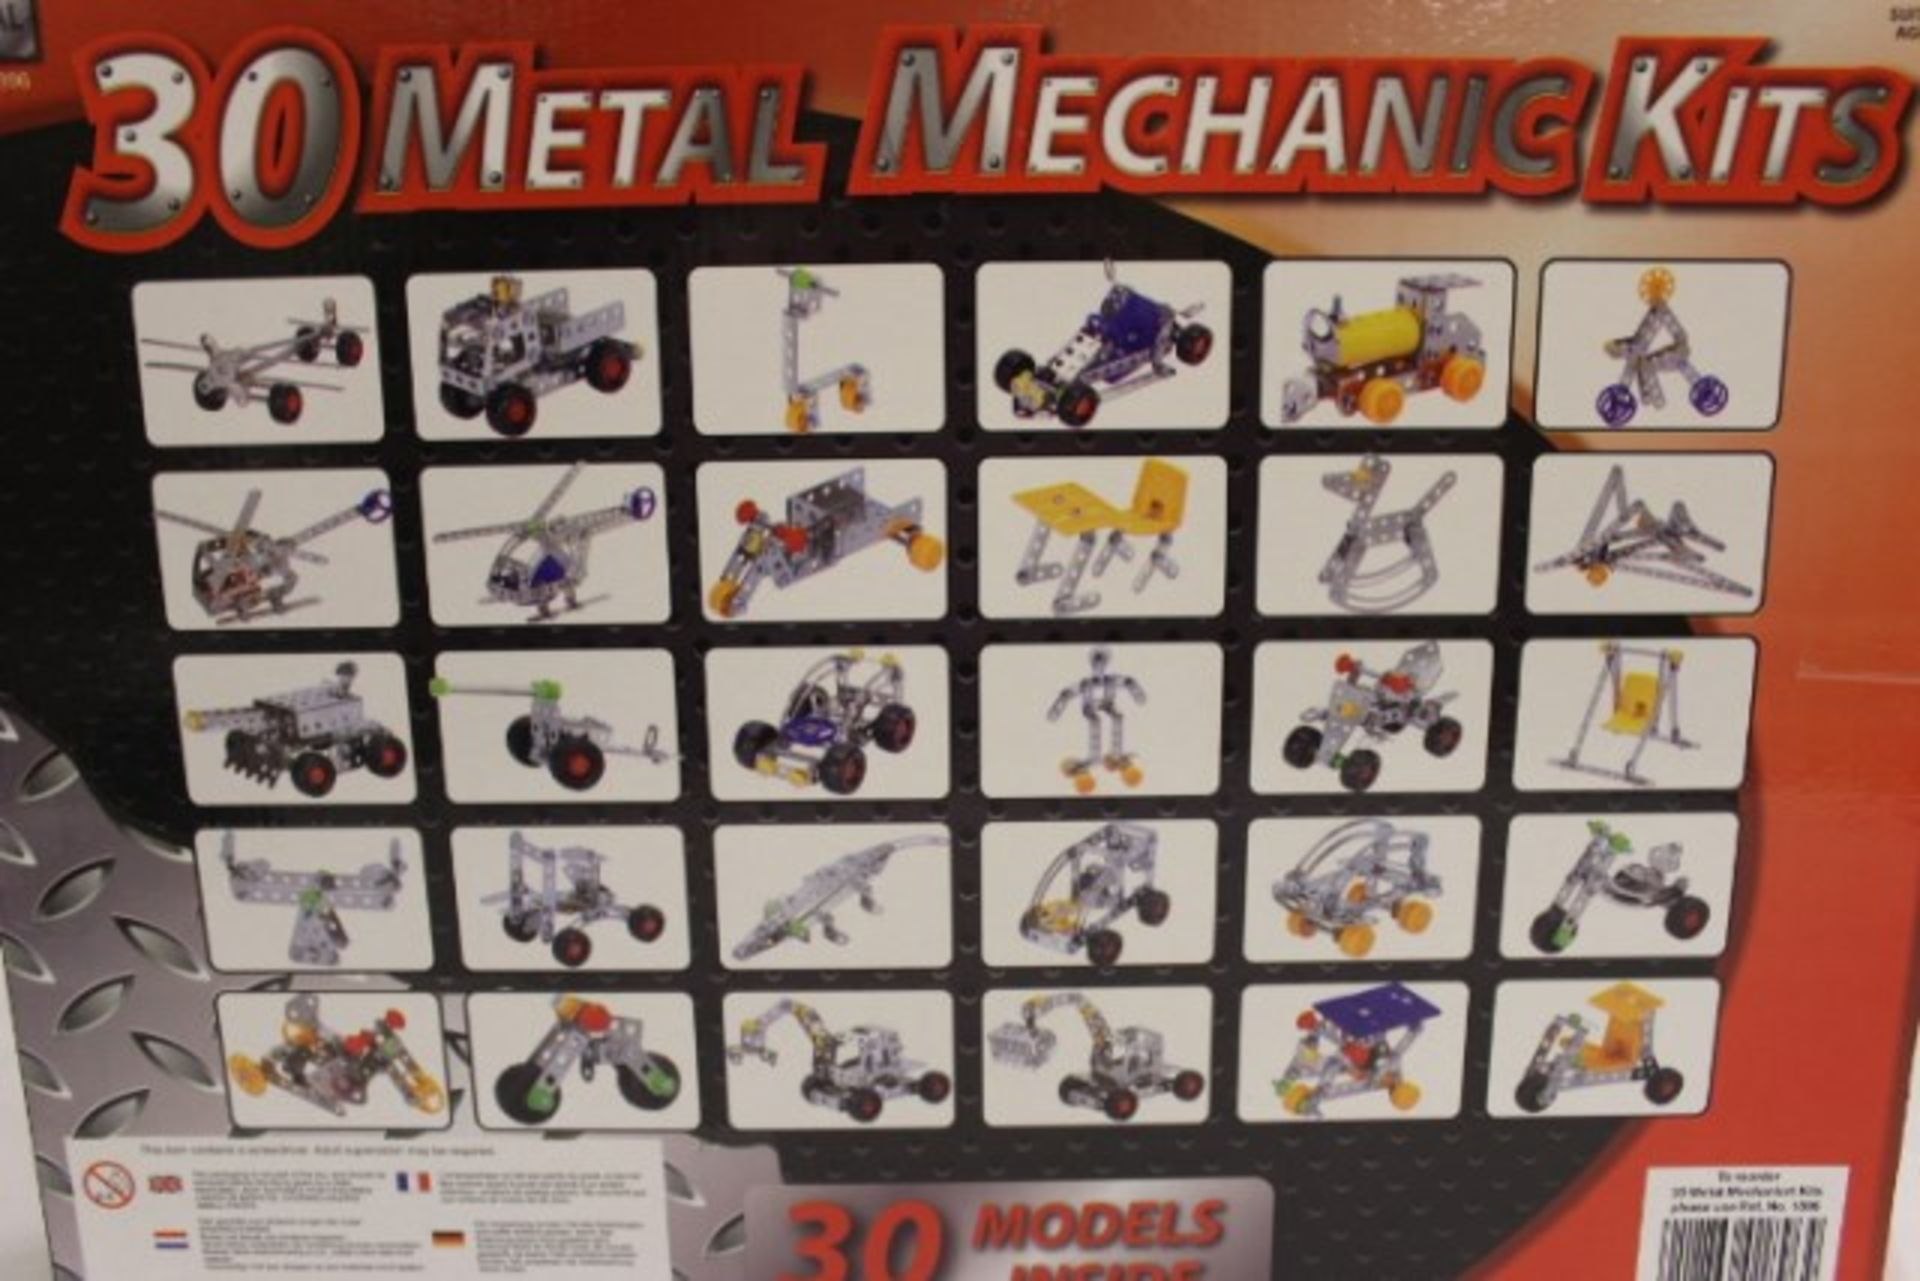 V *TRADE QTY* Brand New 30 Model Metal Mechanics Kit (Makes 30 Different Models) Fits With Meccano X - Image 2 of 2